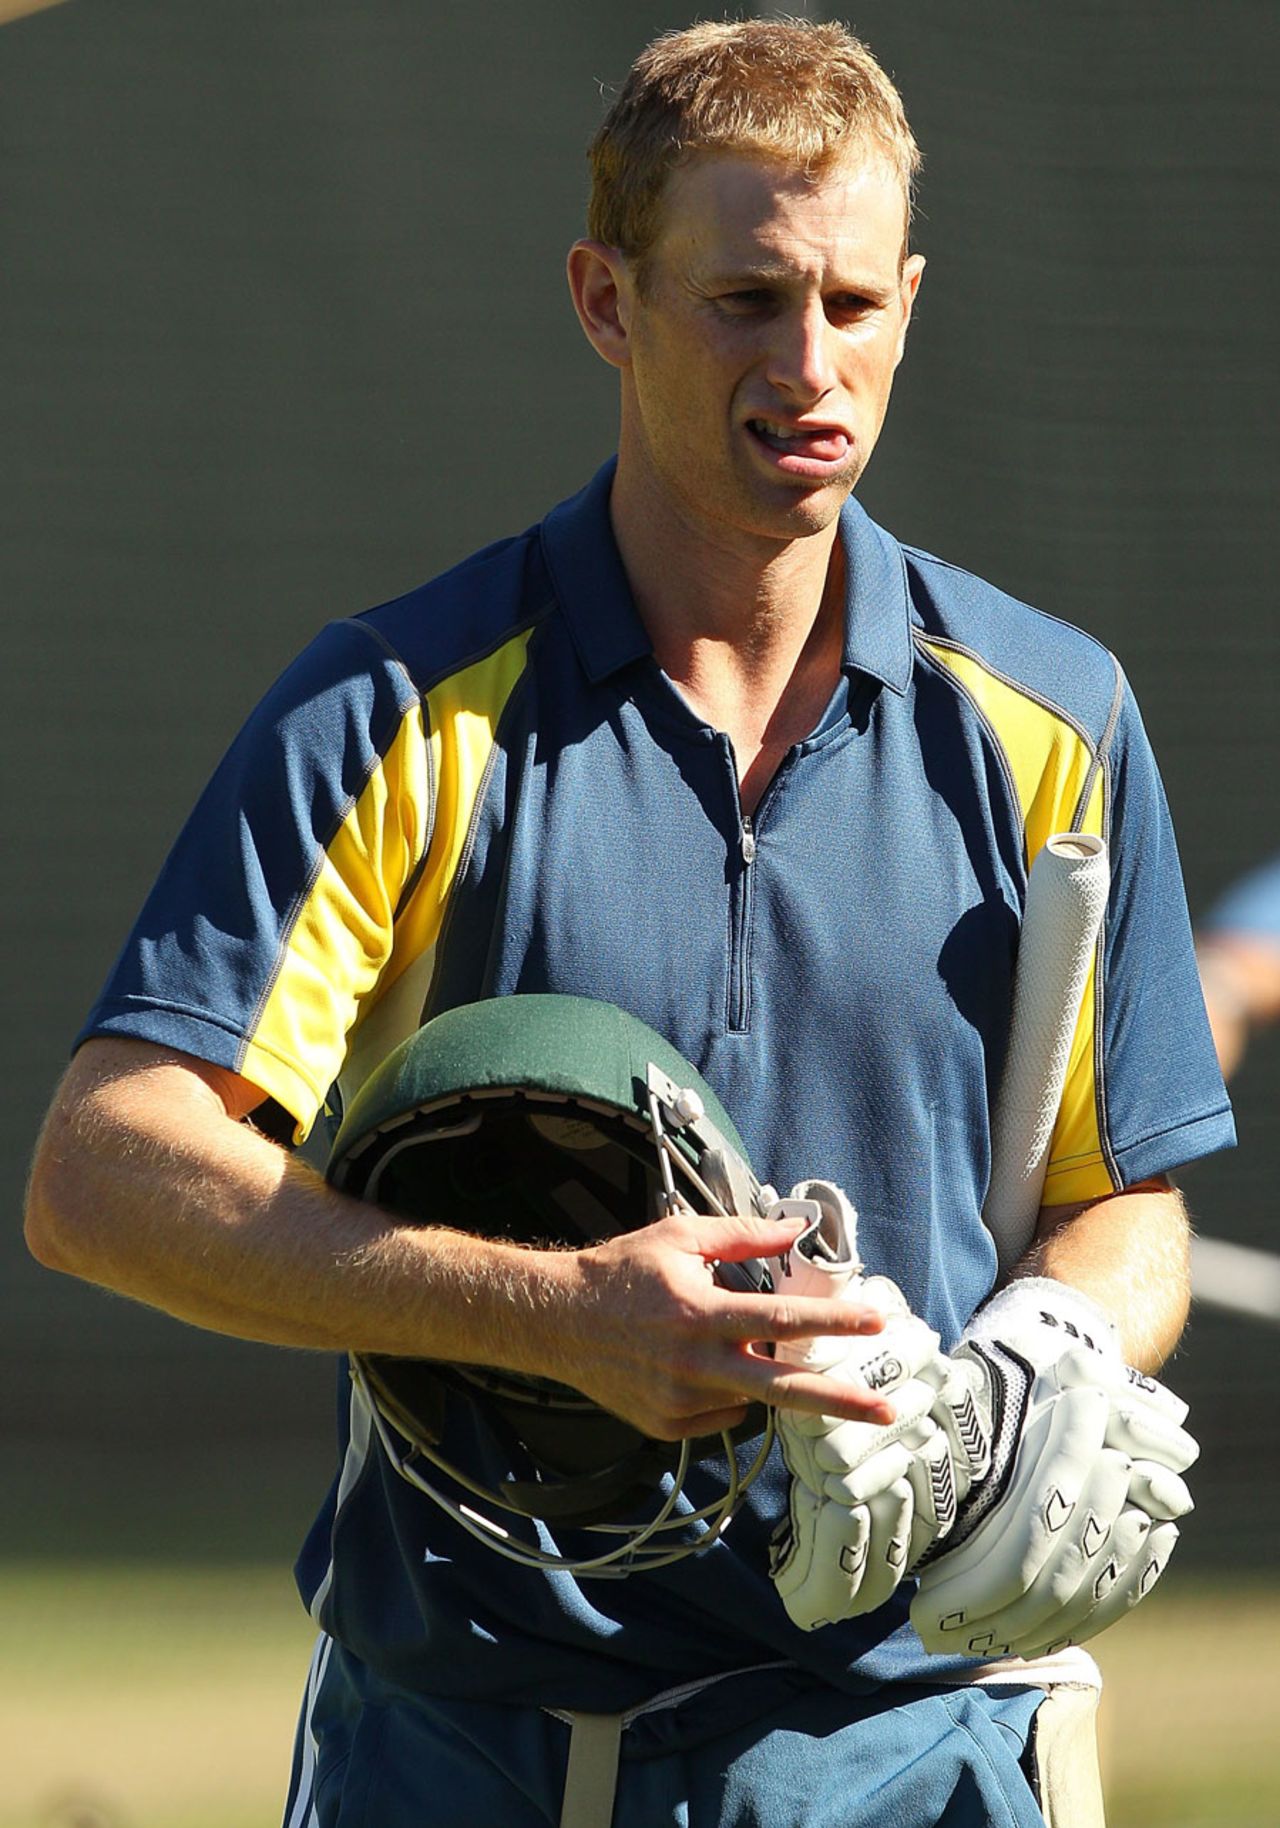 Adam Voges prepares for what could be his first international match since March 2010, Perth, February 5, 2011